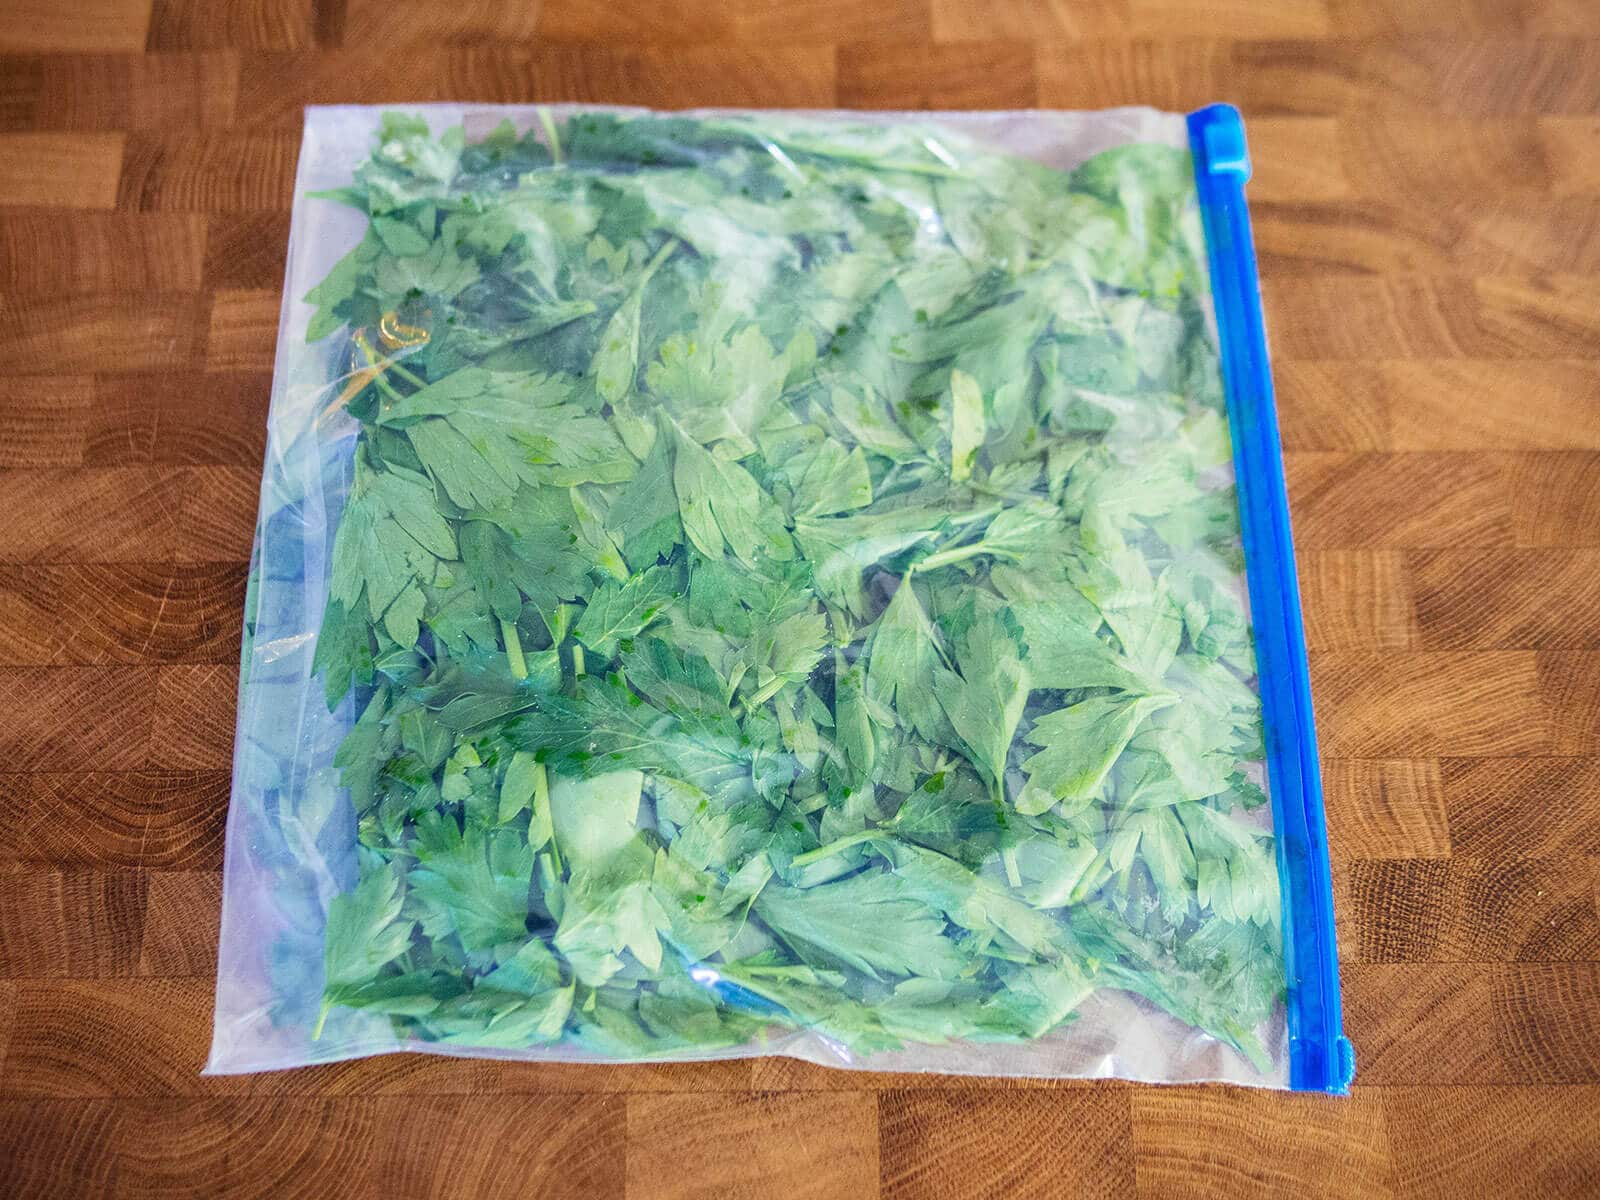 Freezer bag full of parsley leaves with all the air expressed